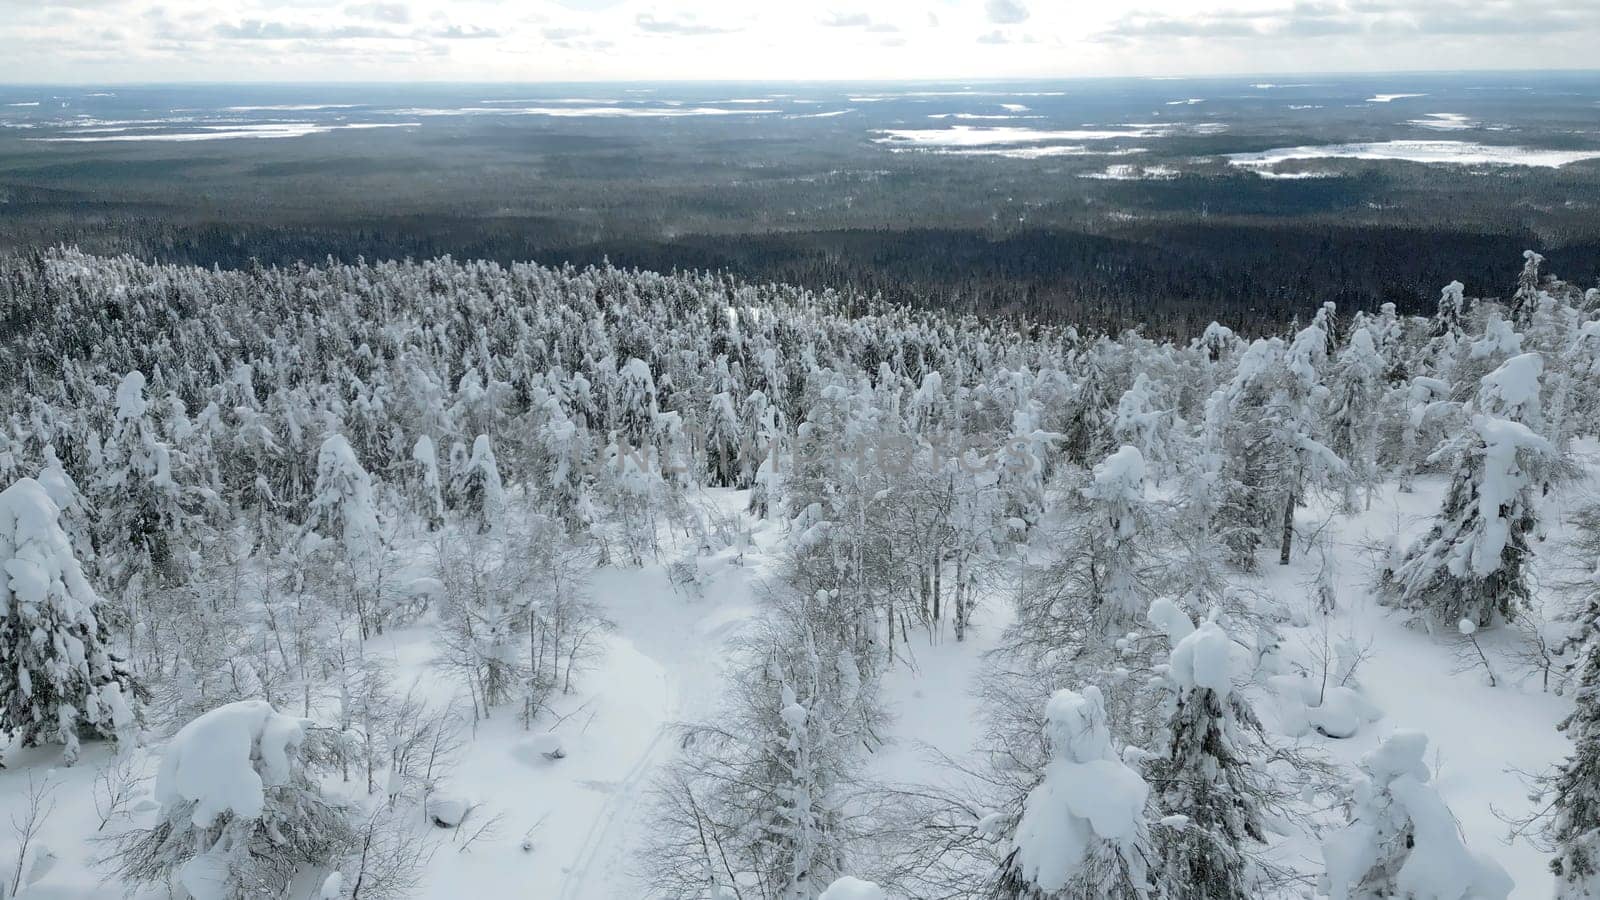 Aerial view of a people walking among snow covered pine trees in a winter forest. Clip. Concept of travelling and hiking